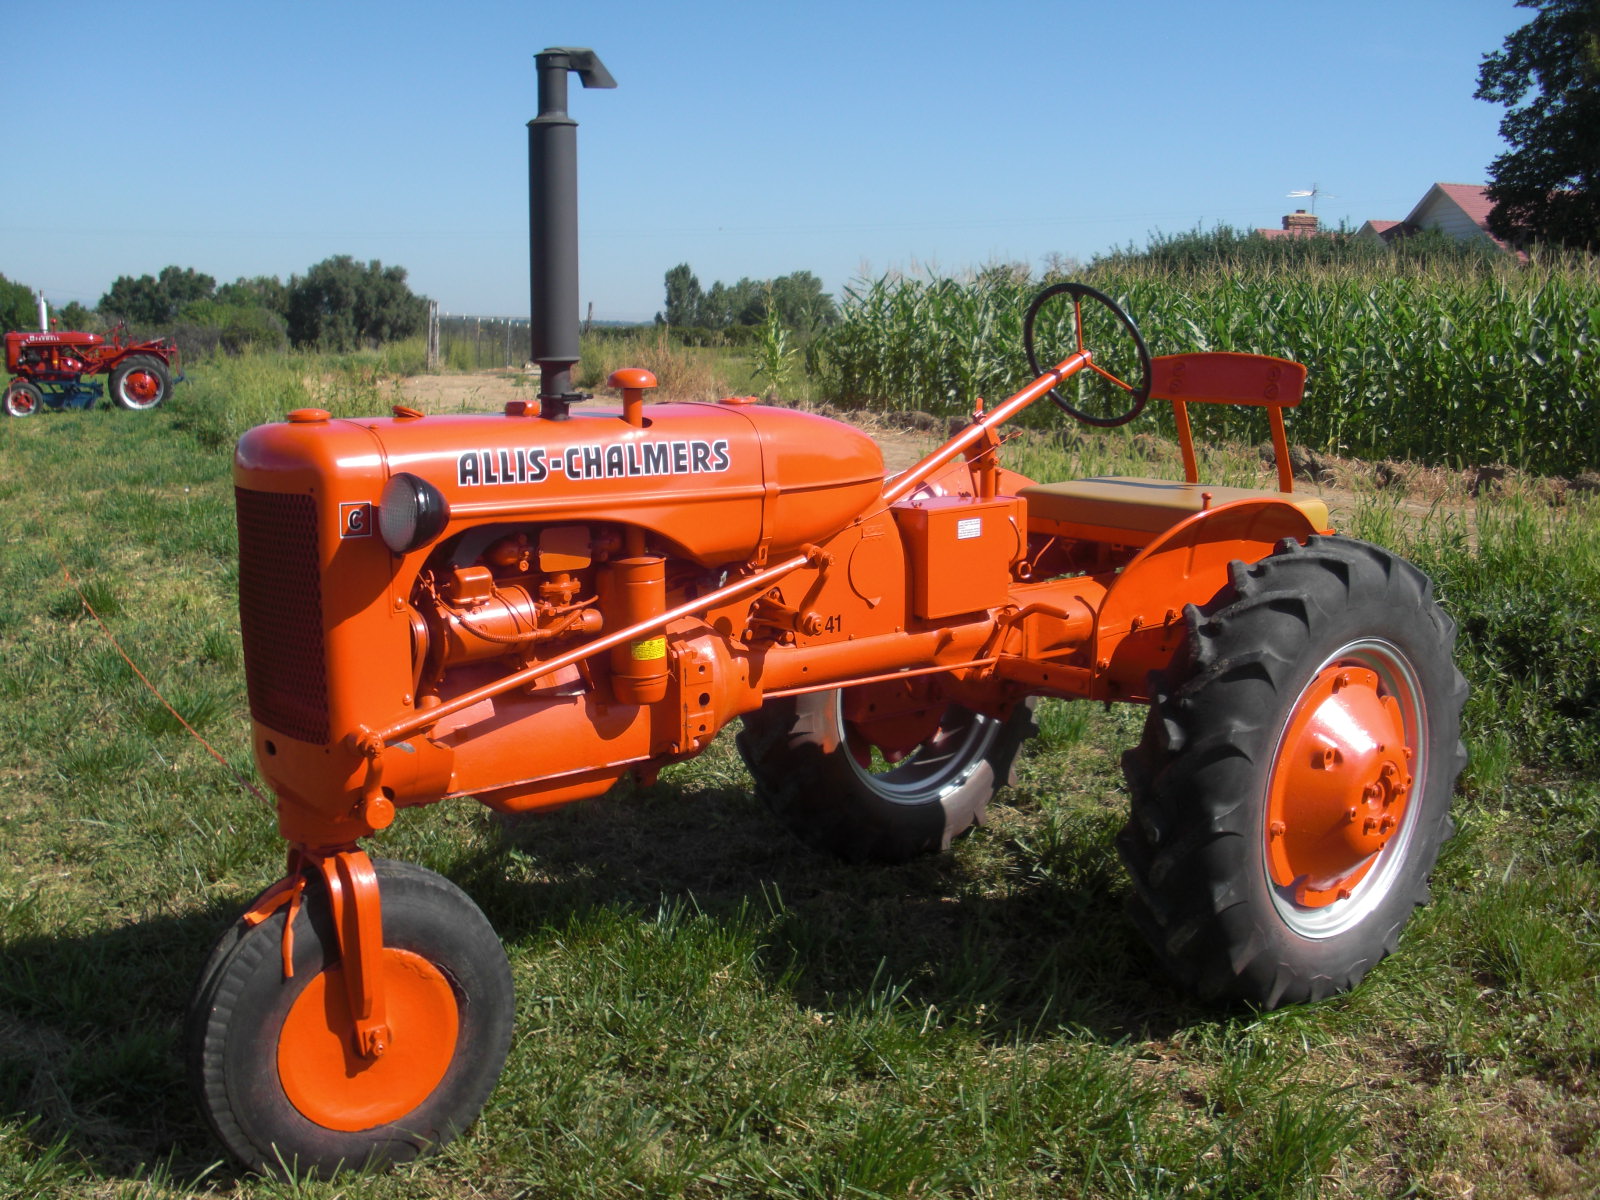 Allis Chalmers Tractor Including 10w/30, 15w/40 Engine Oil – Tractor ...